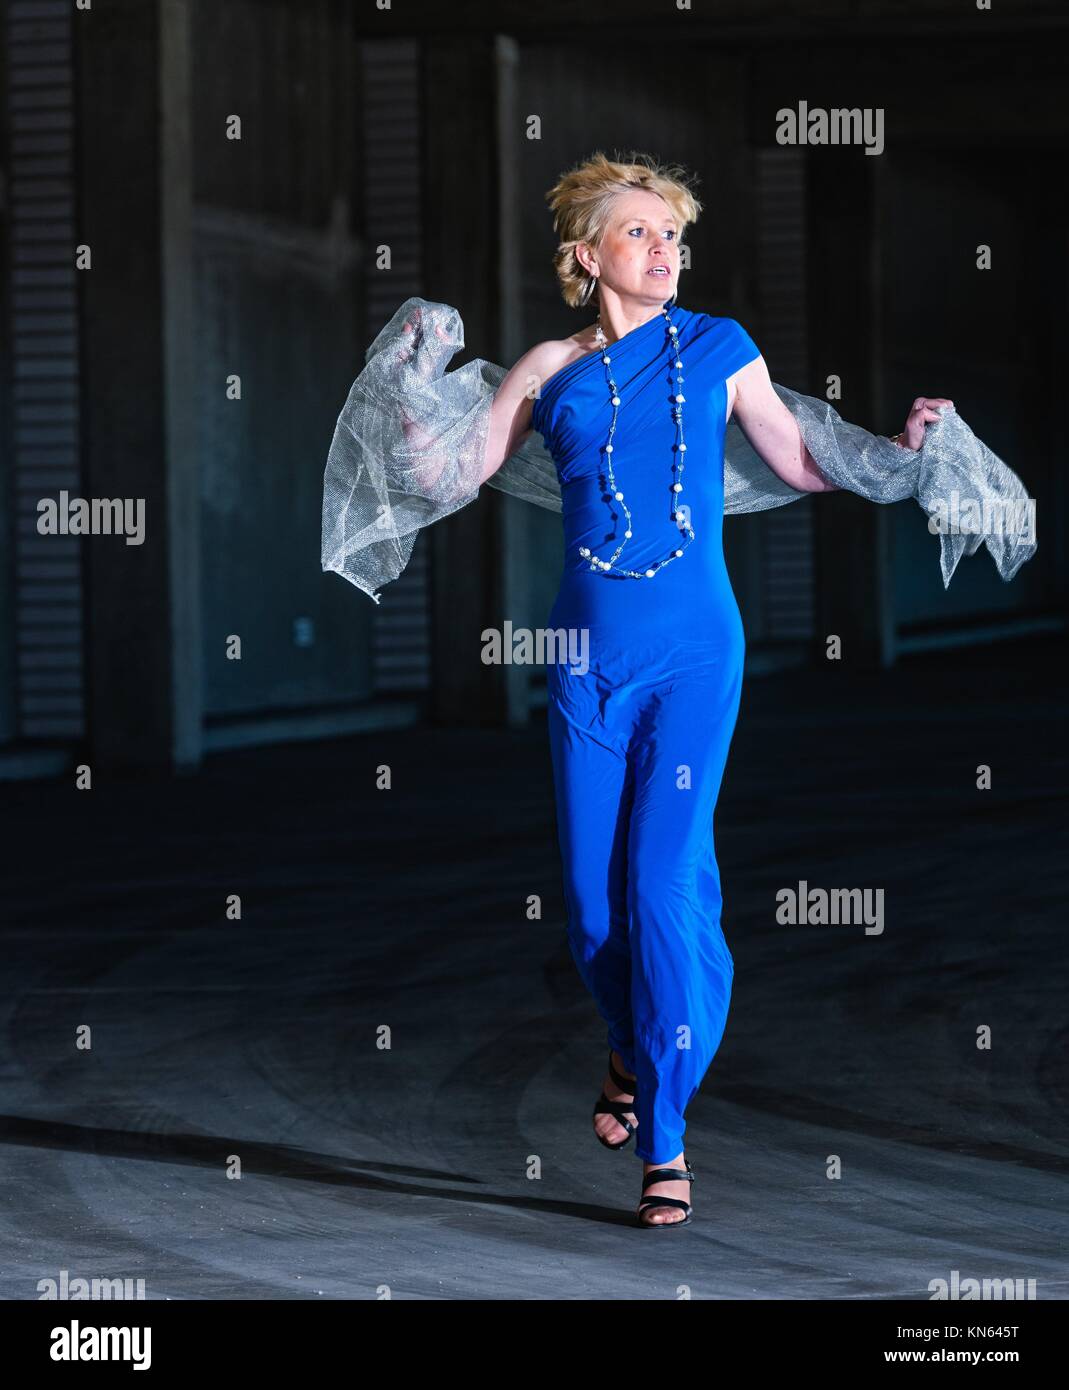 Frightened woman wearing blue dress and running in the public parking house. Stock Photo